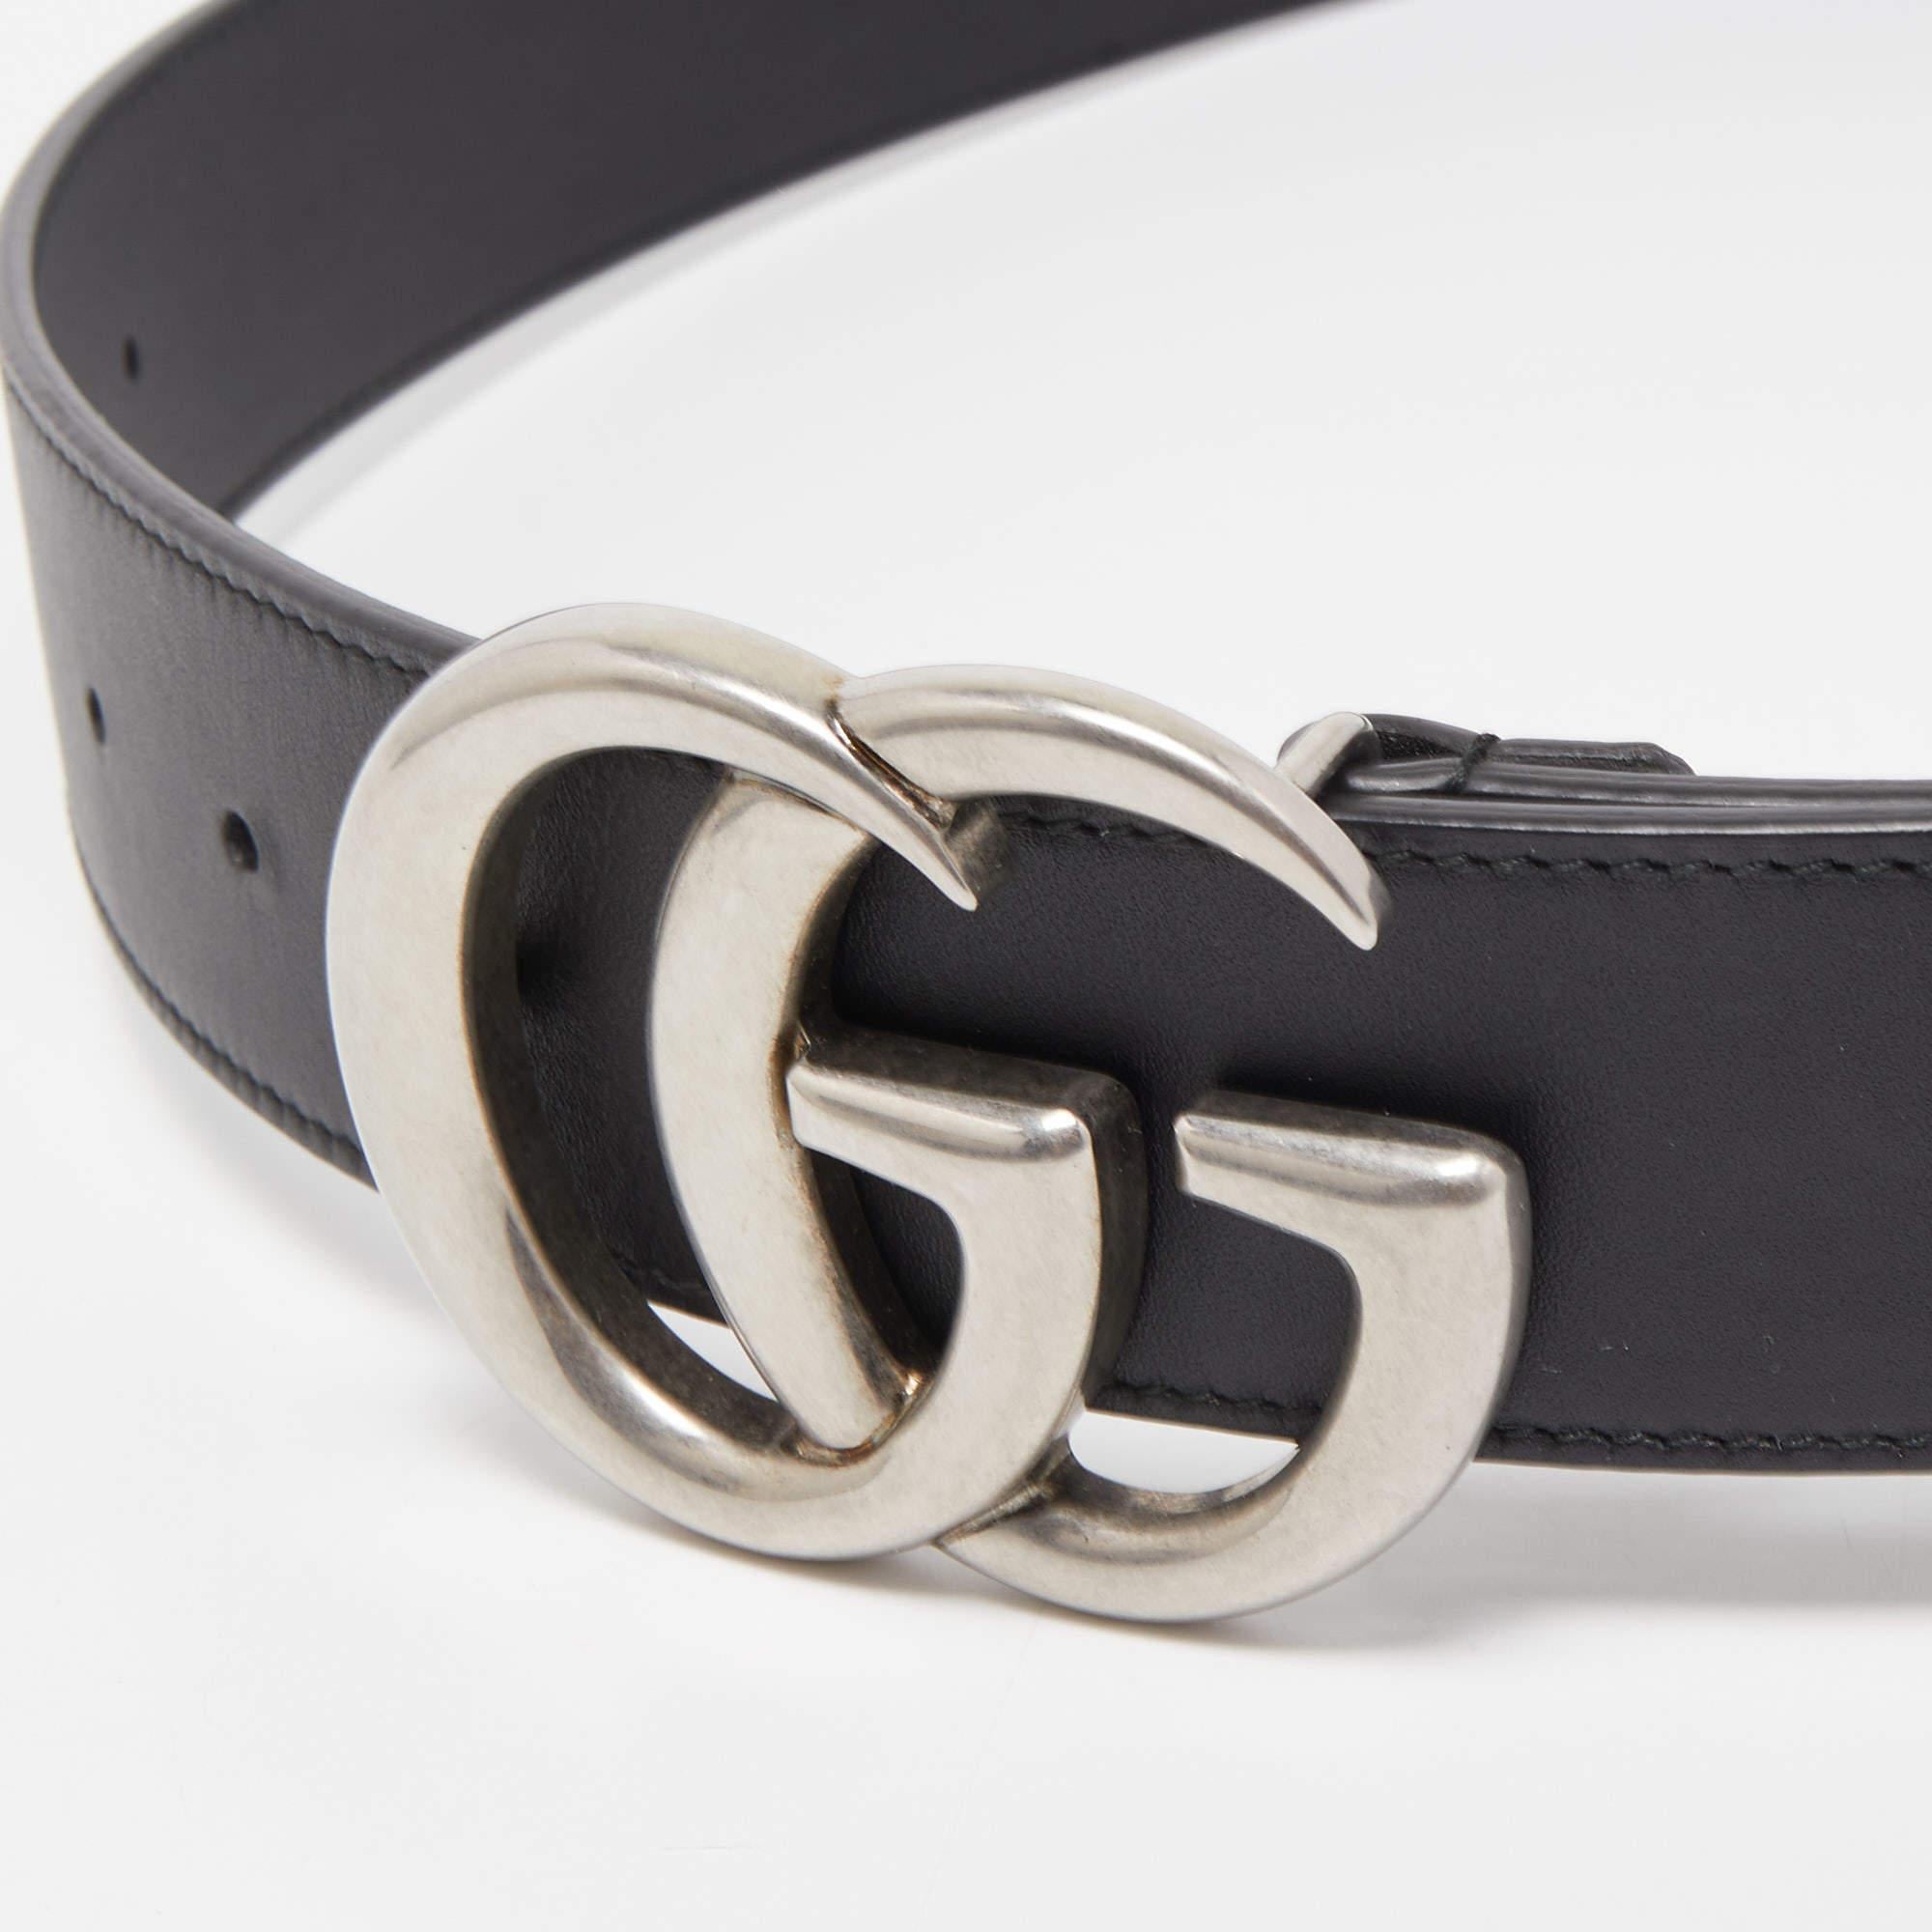 The GG Marmont belt by Gucci is made in Italy from black leather keeping everyday styling in mind. It's designed with tonal stitches and finished with the House's GG buckle in silver-tone hardware.

Includes: Original Dustbag, Original Box
